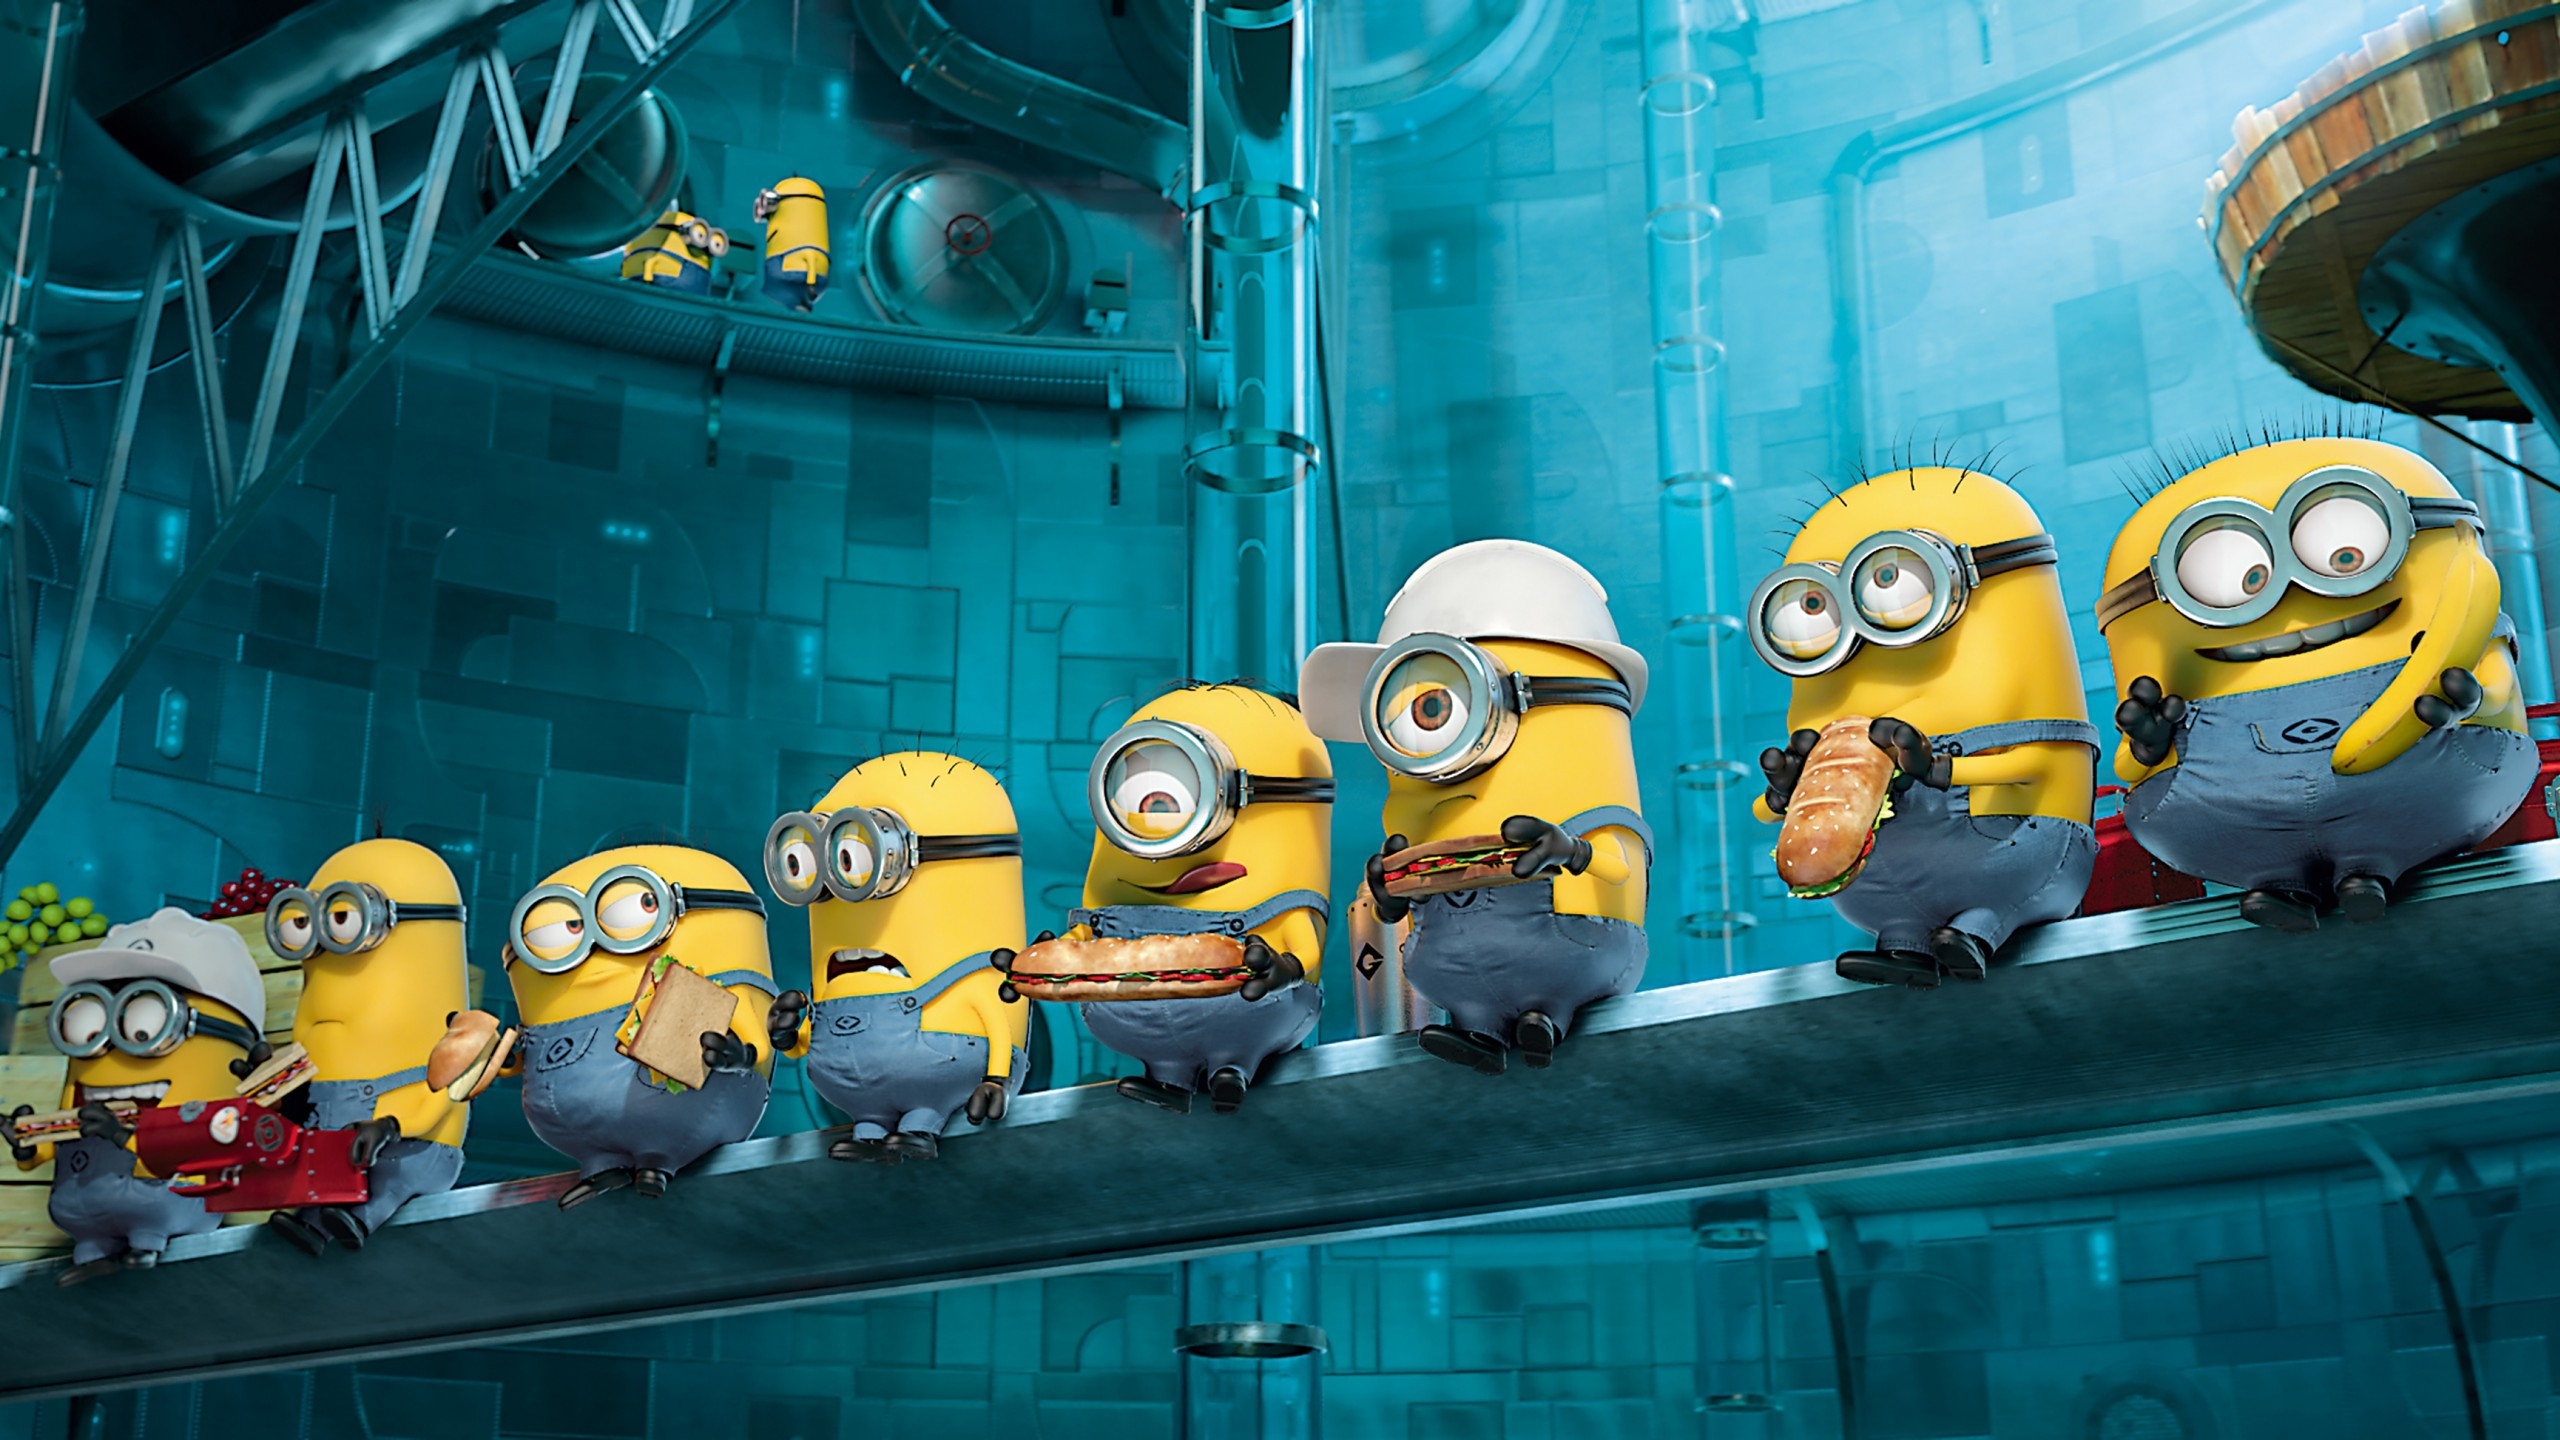 2013 Despicable Me Minions for 2560x1440 HDTV resolution